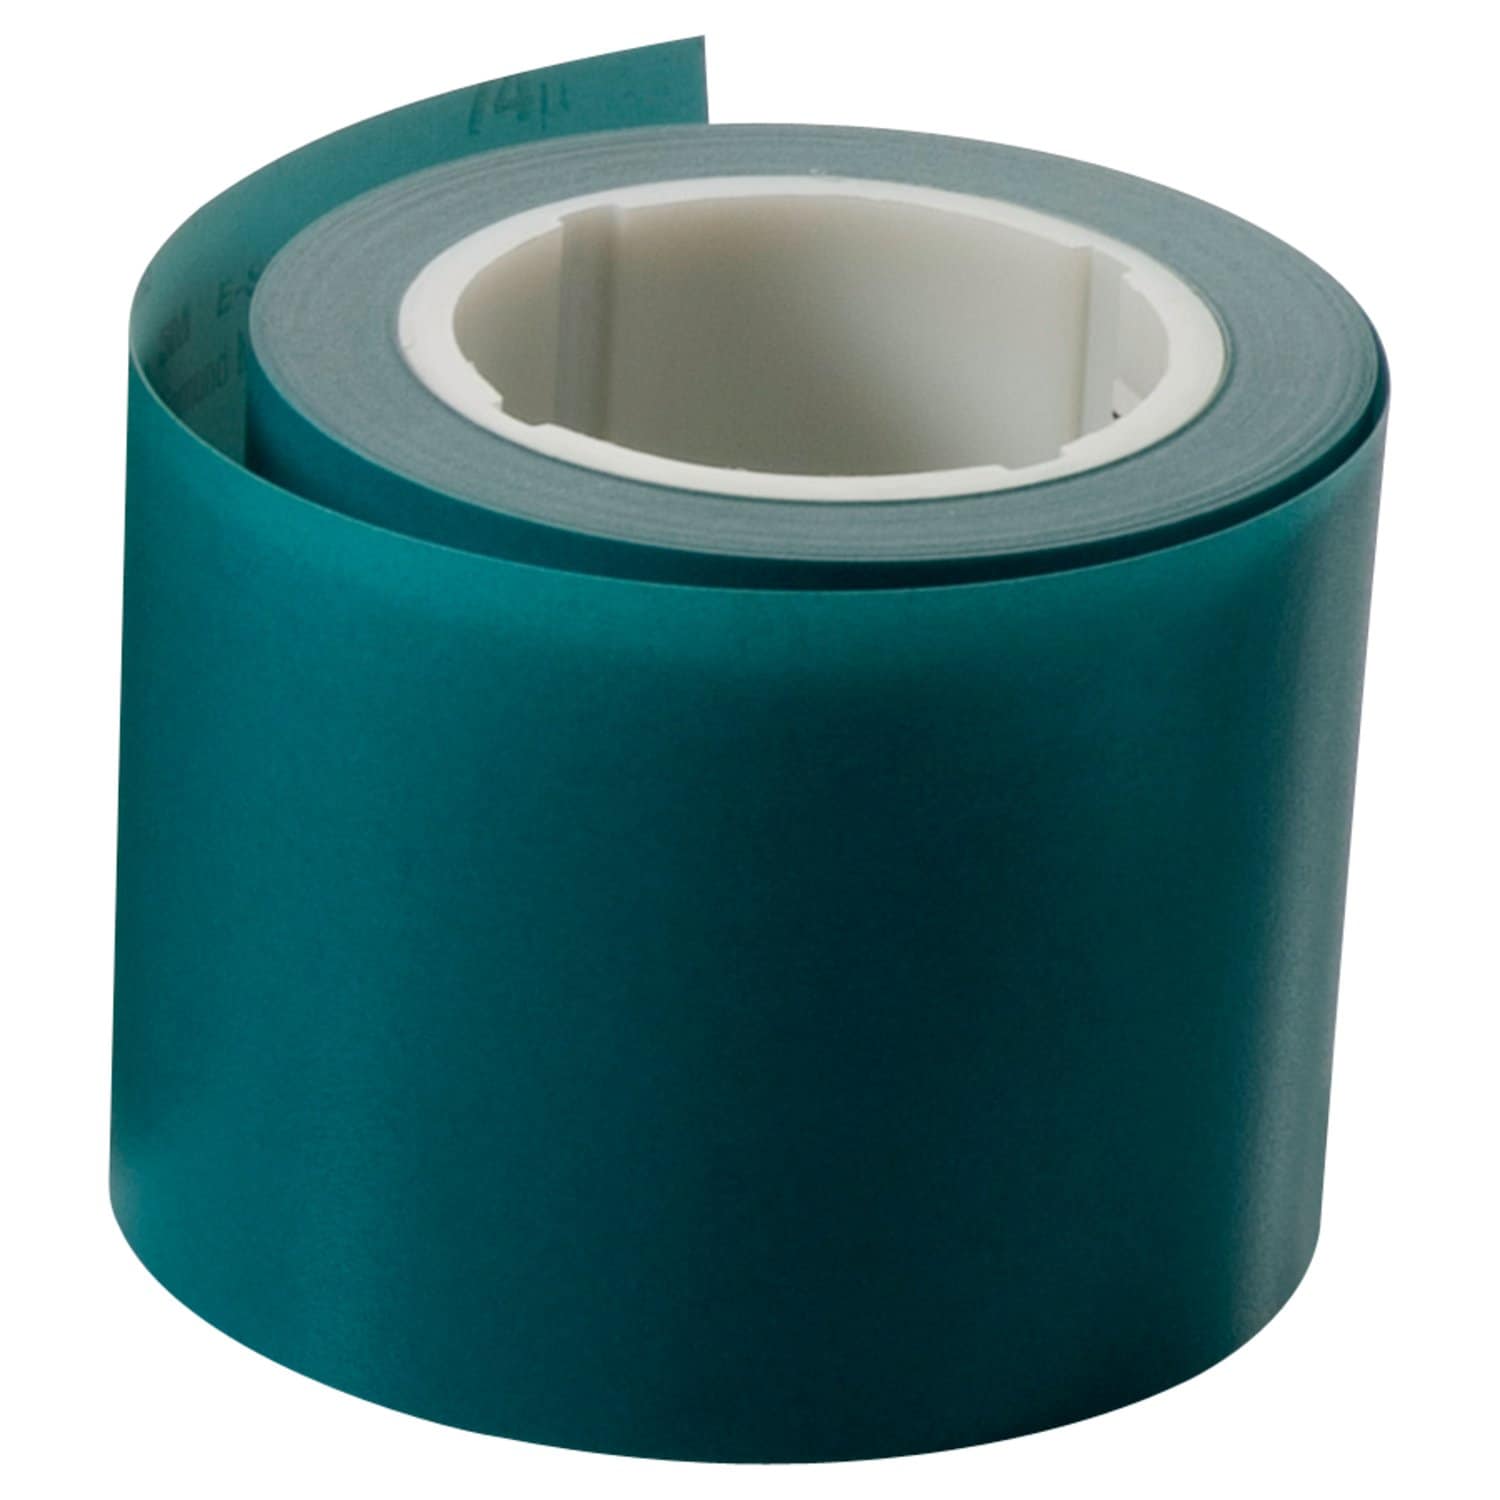 7010325880 - 3M Microfinishing Film Roll 373L, 30 Mic 5MIL, 0.571 in x 300 ft x .787 in (14.5mmx91.5m), ASO, End Roll Mark Red